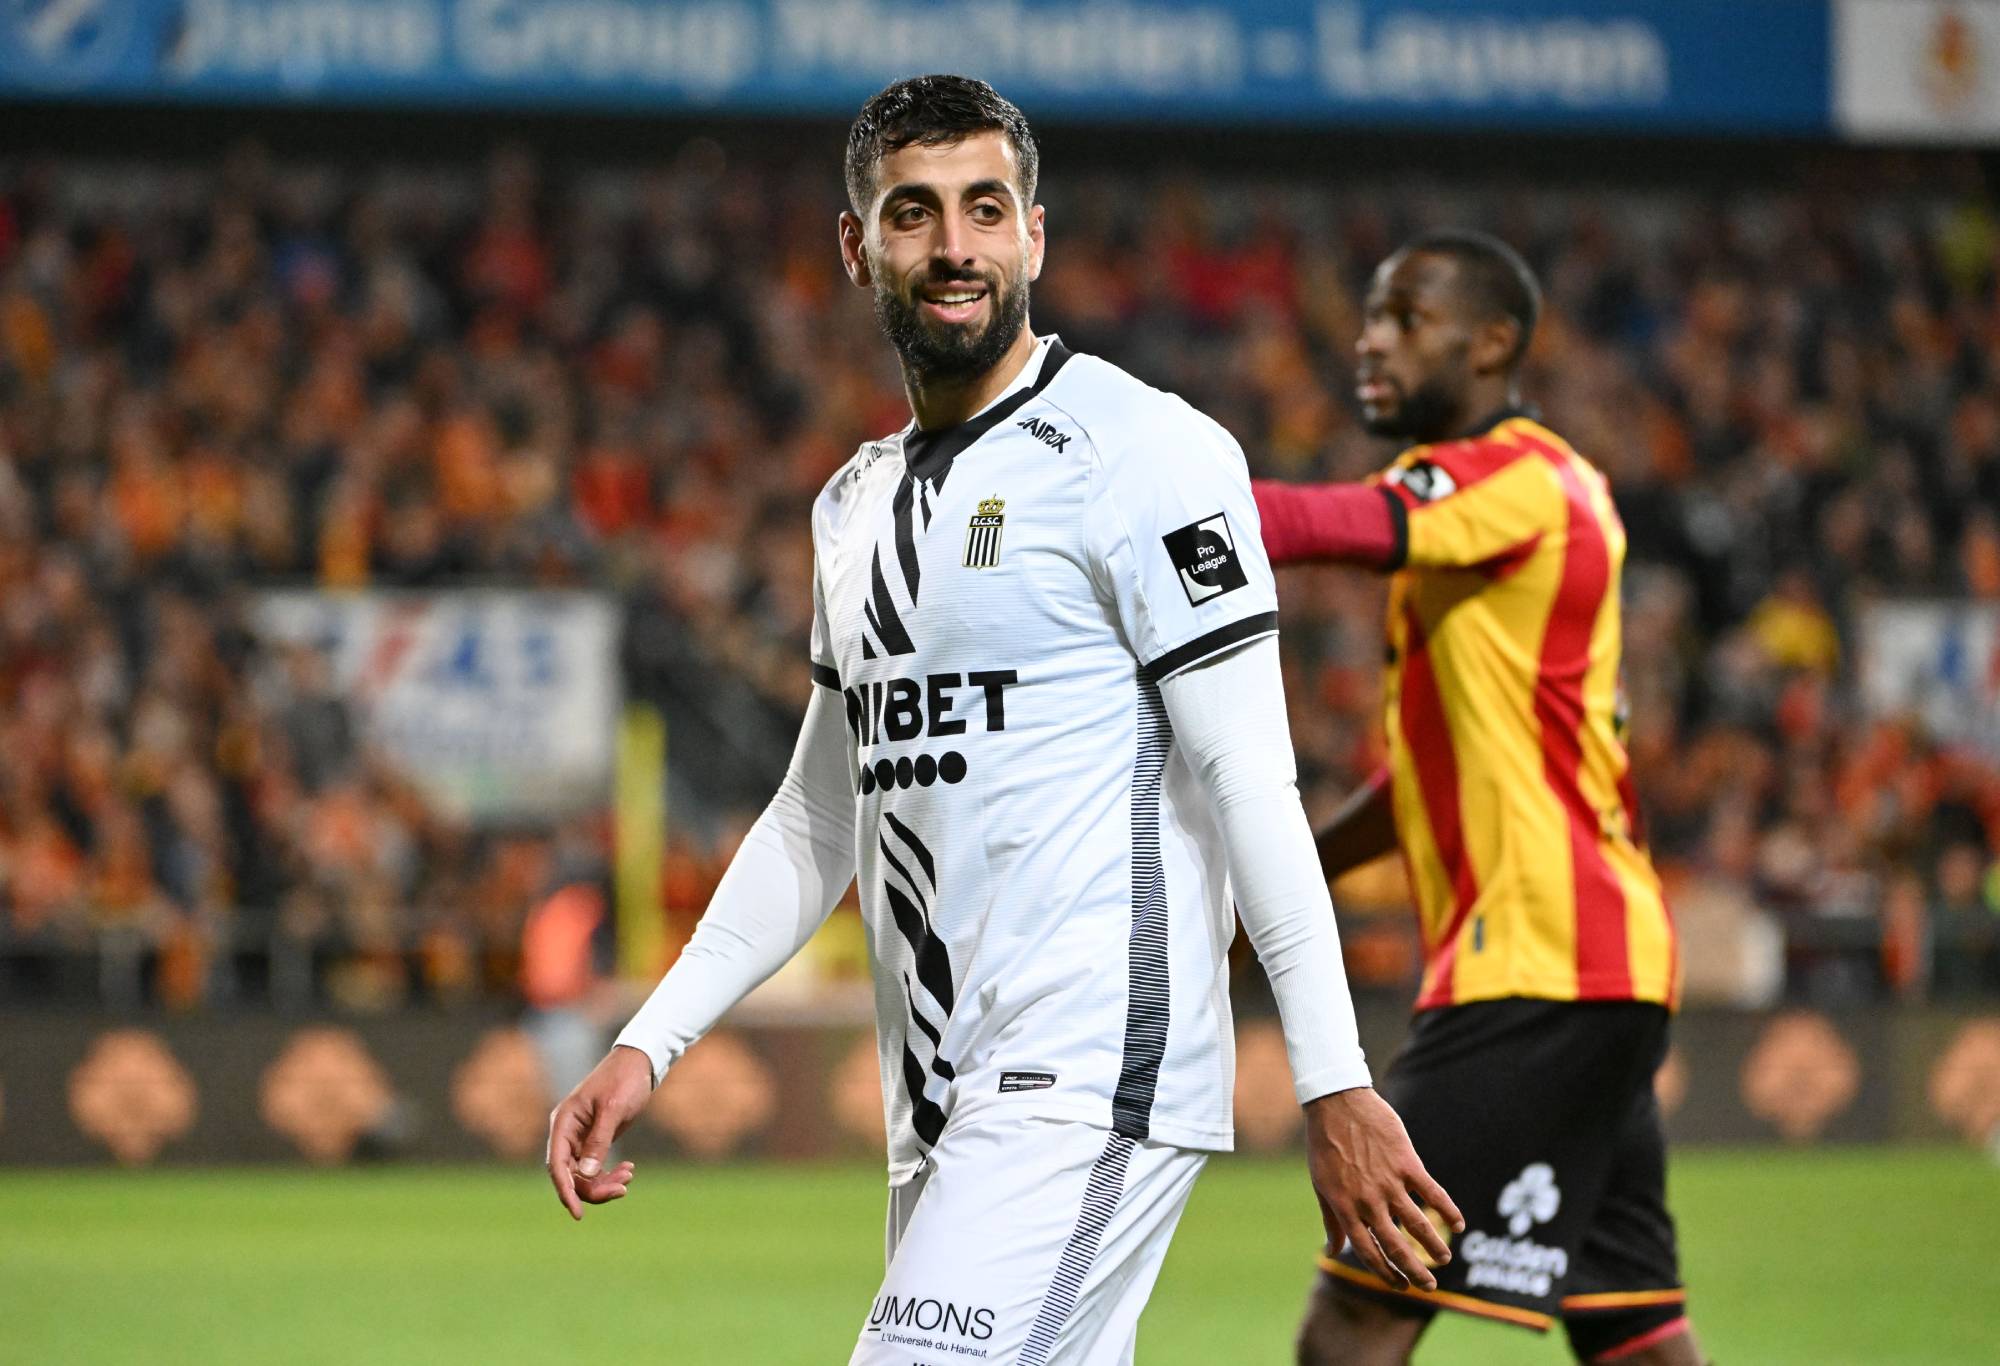 Oday Dabbagh of Charleroi pictured during a football game between KV Mechelen and Sporting Charleroi on match day 14 of the Jupiler Pro League season 2023 - 2024 competition on November 11, 2023 in Mechelen, Belgium. (Photo by Isosport/MB Media/Getty Images)